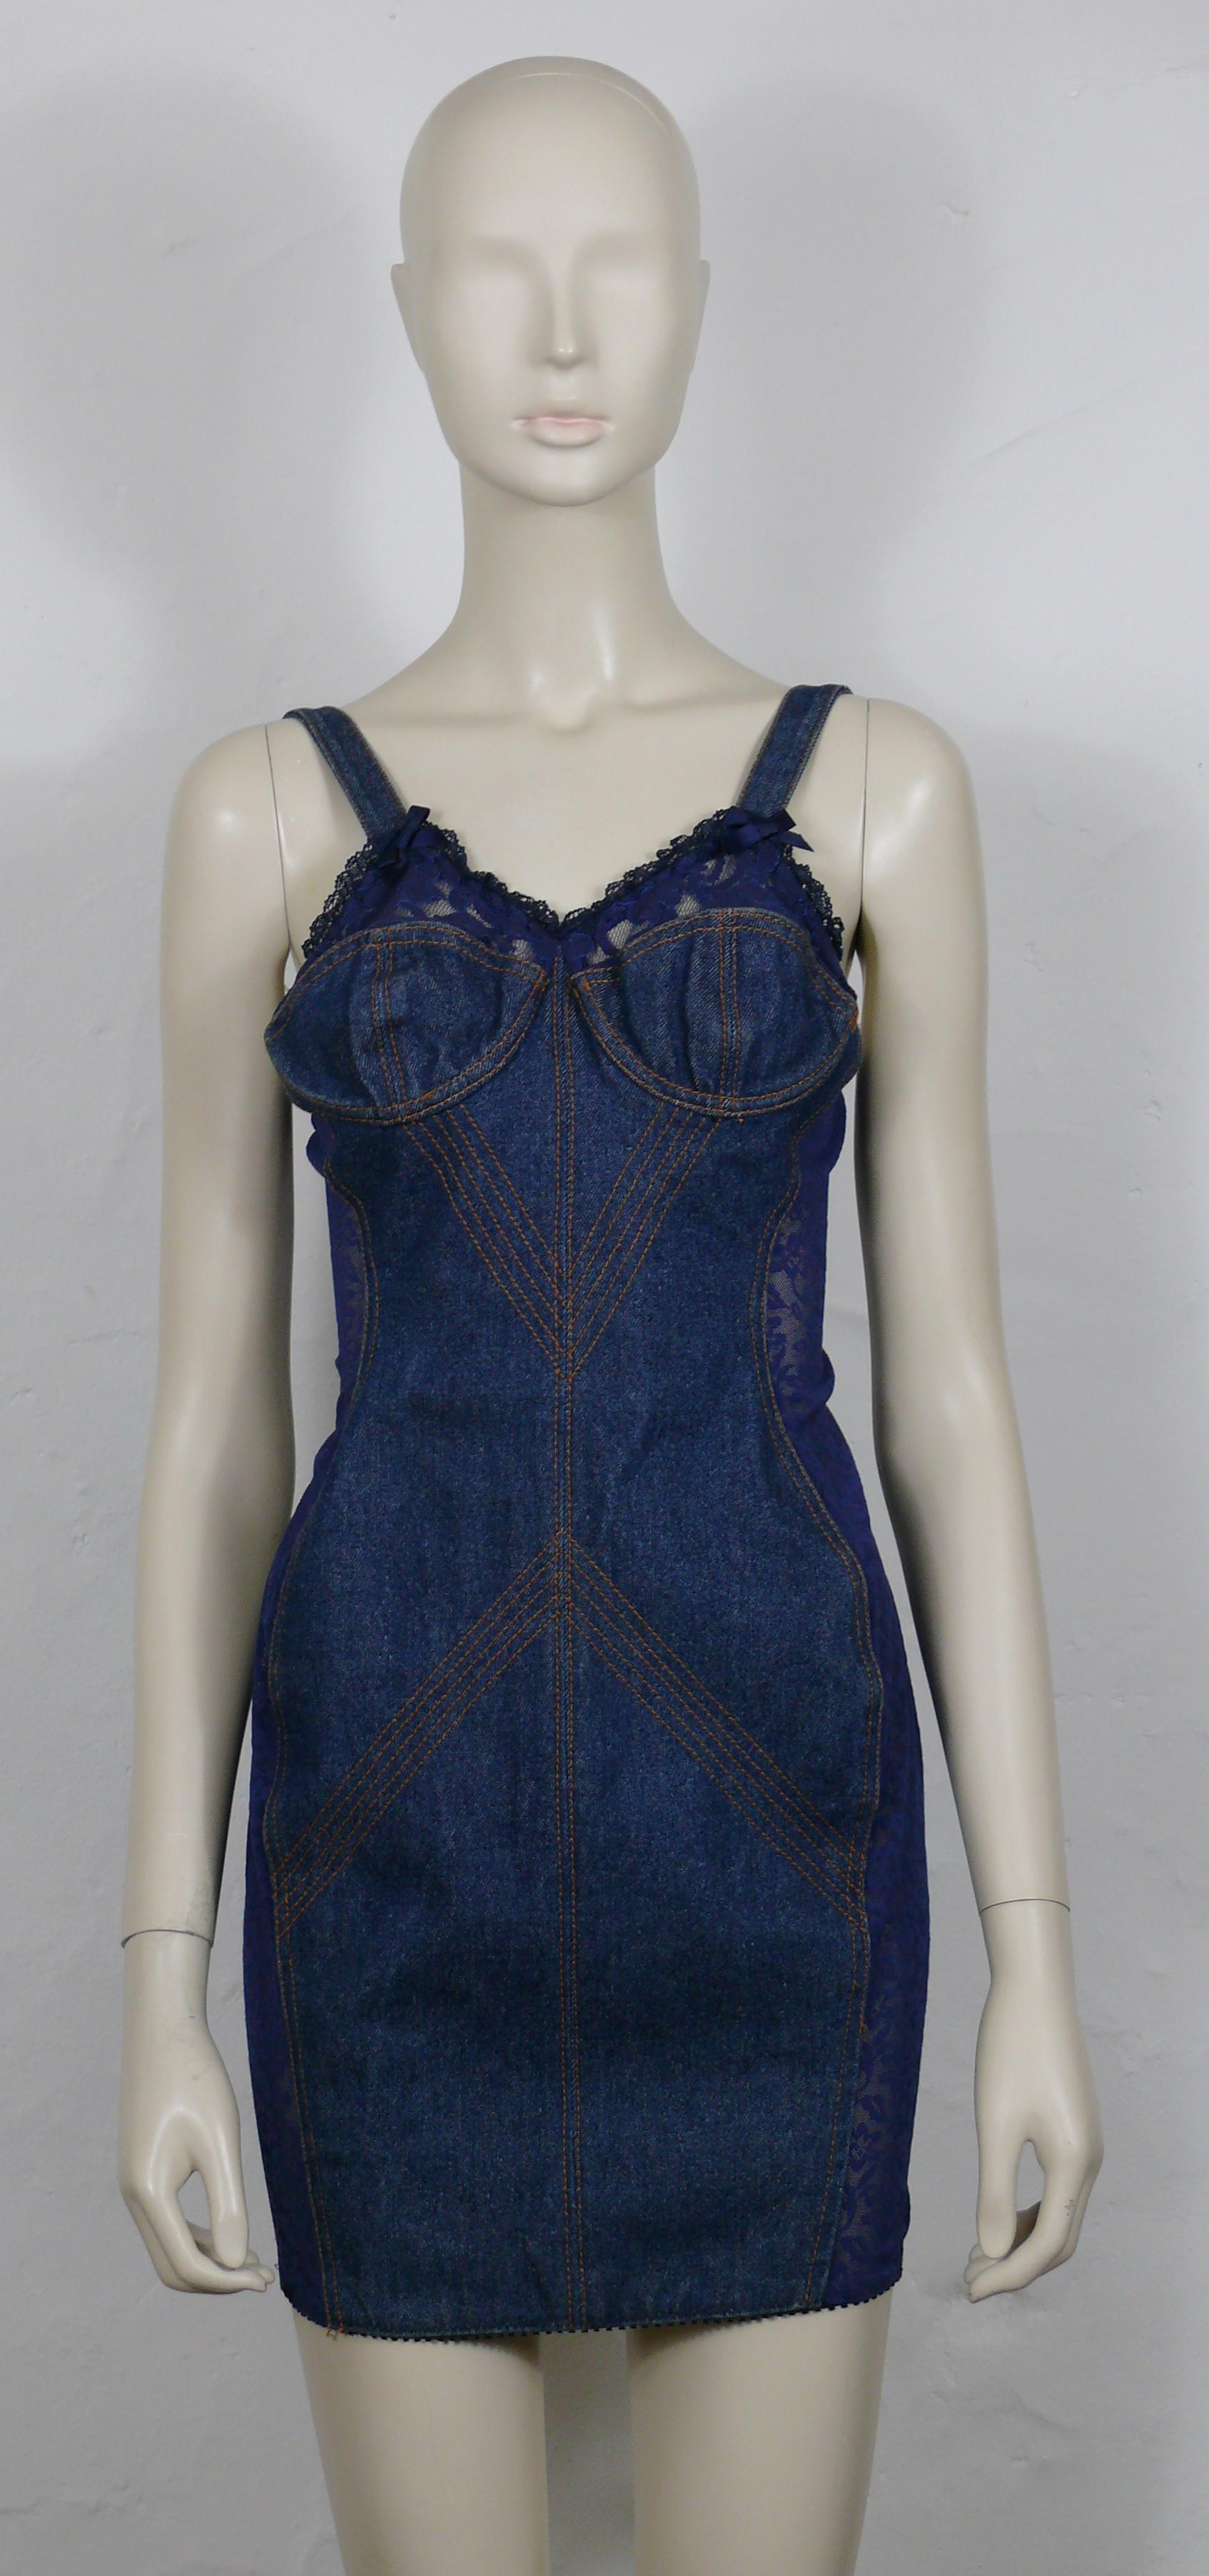 JEAN PAUL GAULTIER JUNIOR vintage blue denim bra mini dress featuring nylon panels, lace and blue satin bows.

Back zippered closure.
Orange stitching details.

Label reads JUNIOR GAULTIER Made in Italy.

Size tag reads : 40.
Please double check